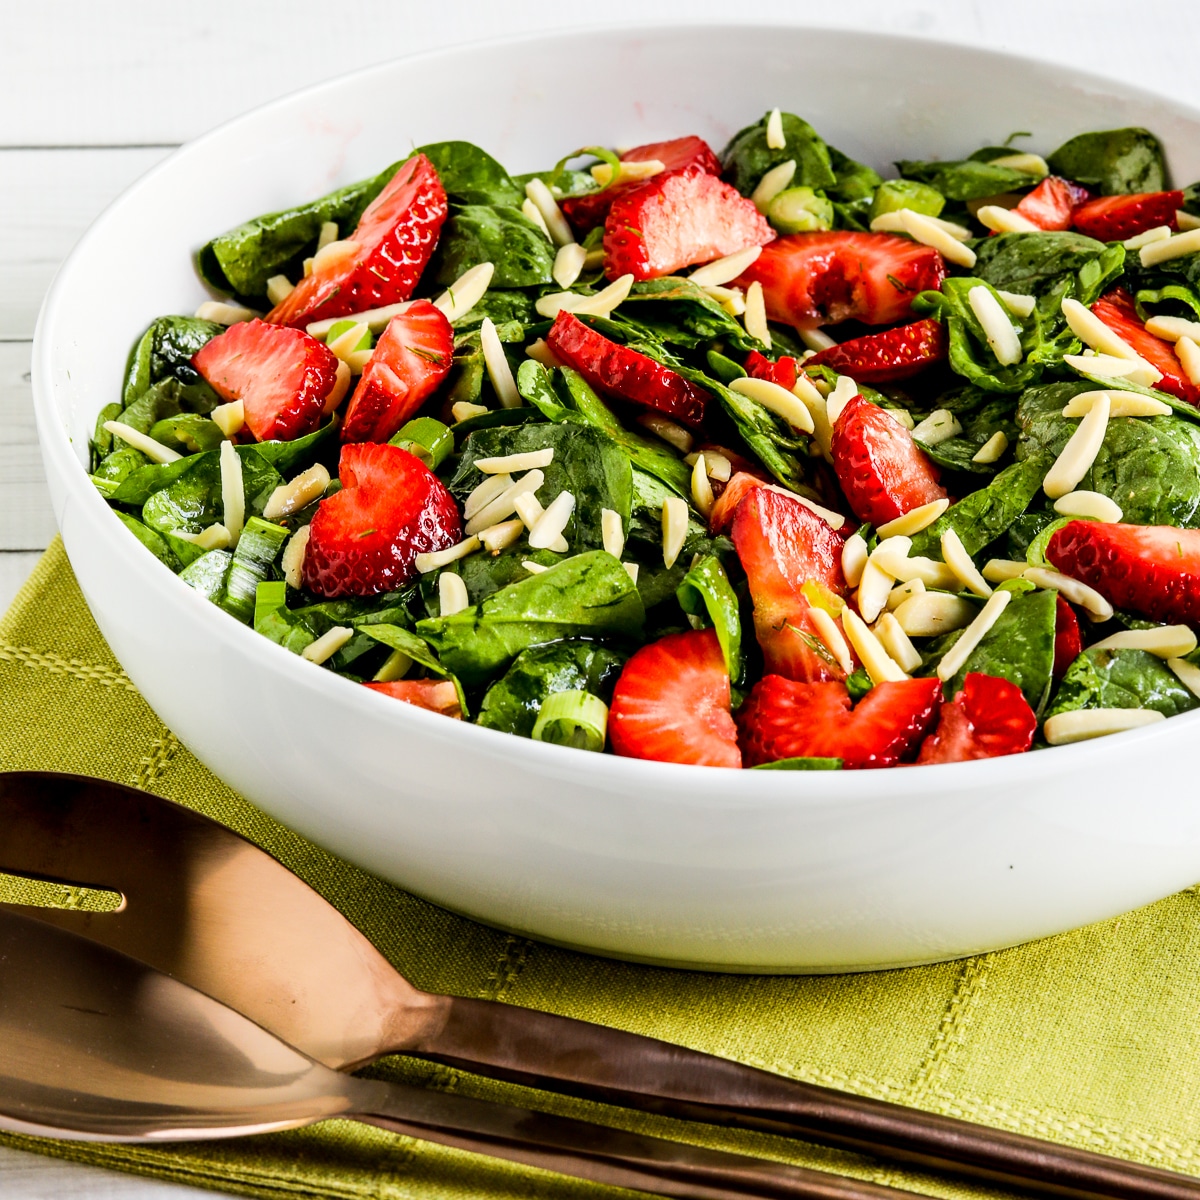 Square image of Strawberry Spinach Salad shown in serving bowl.